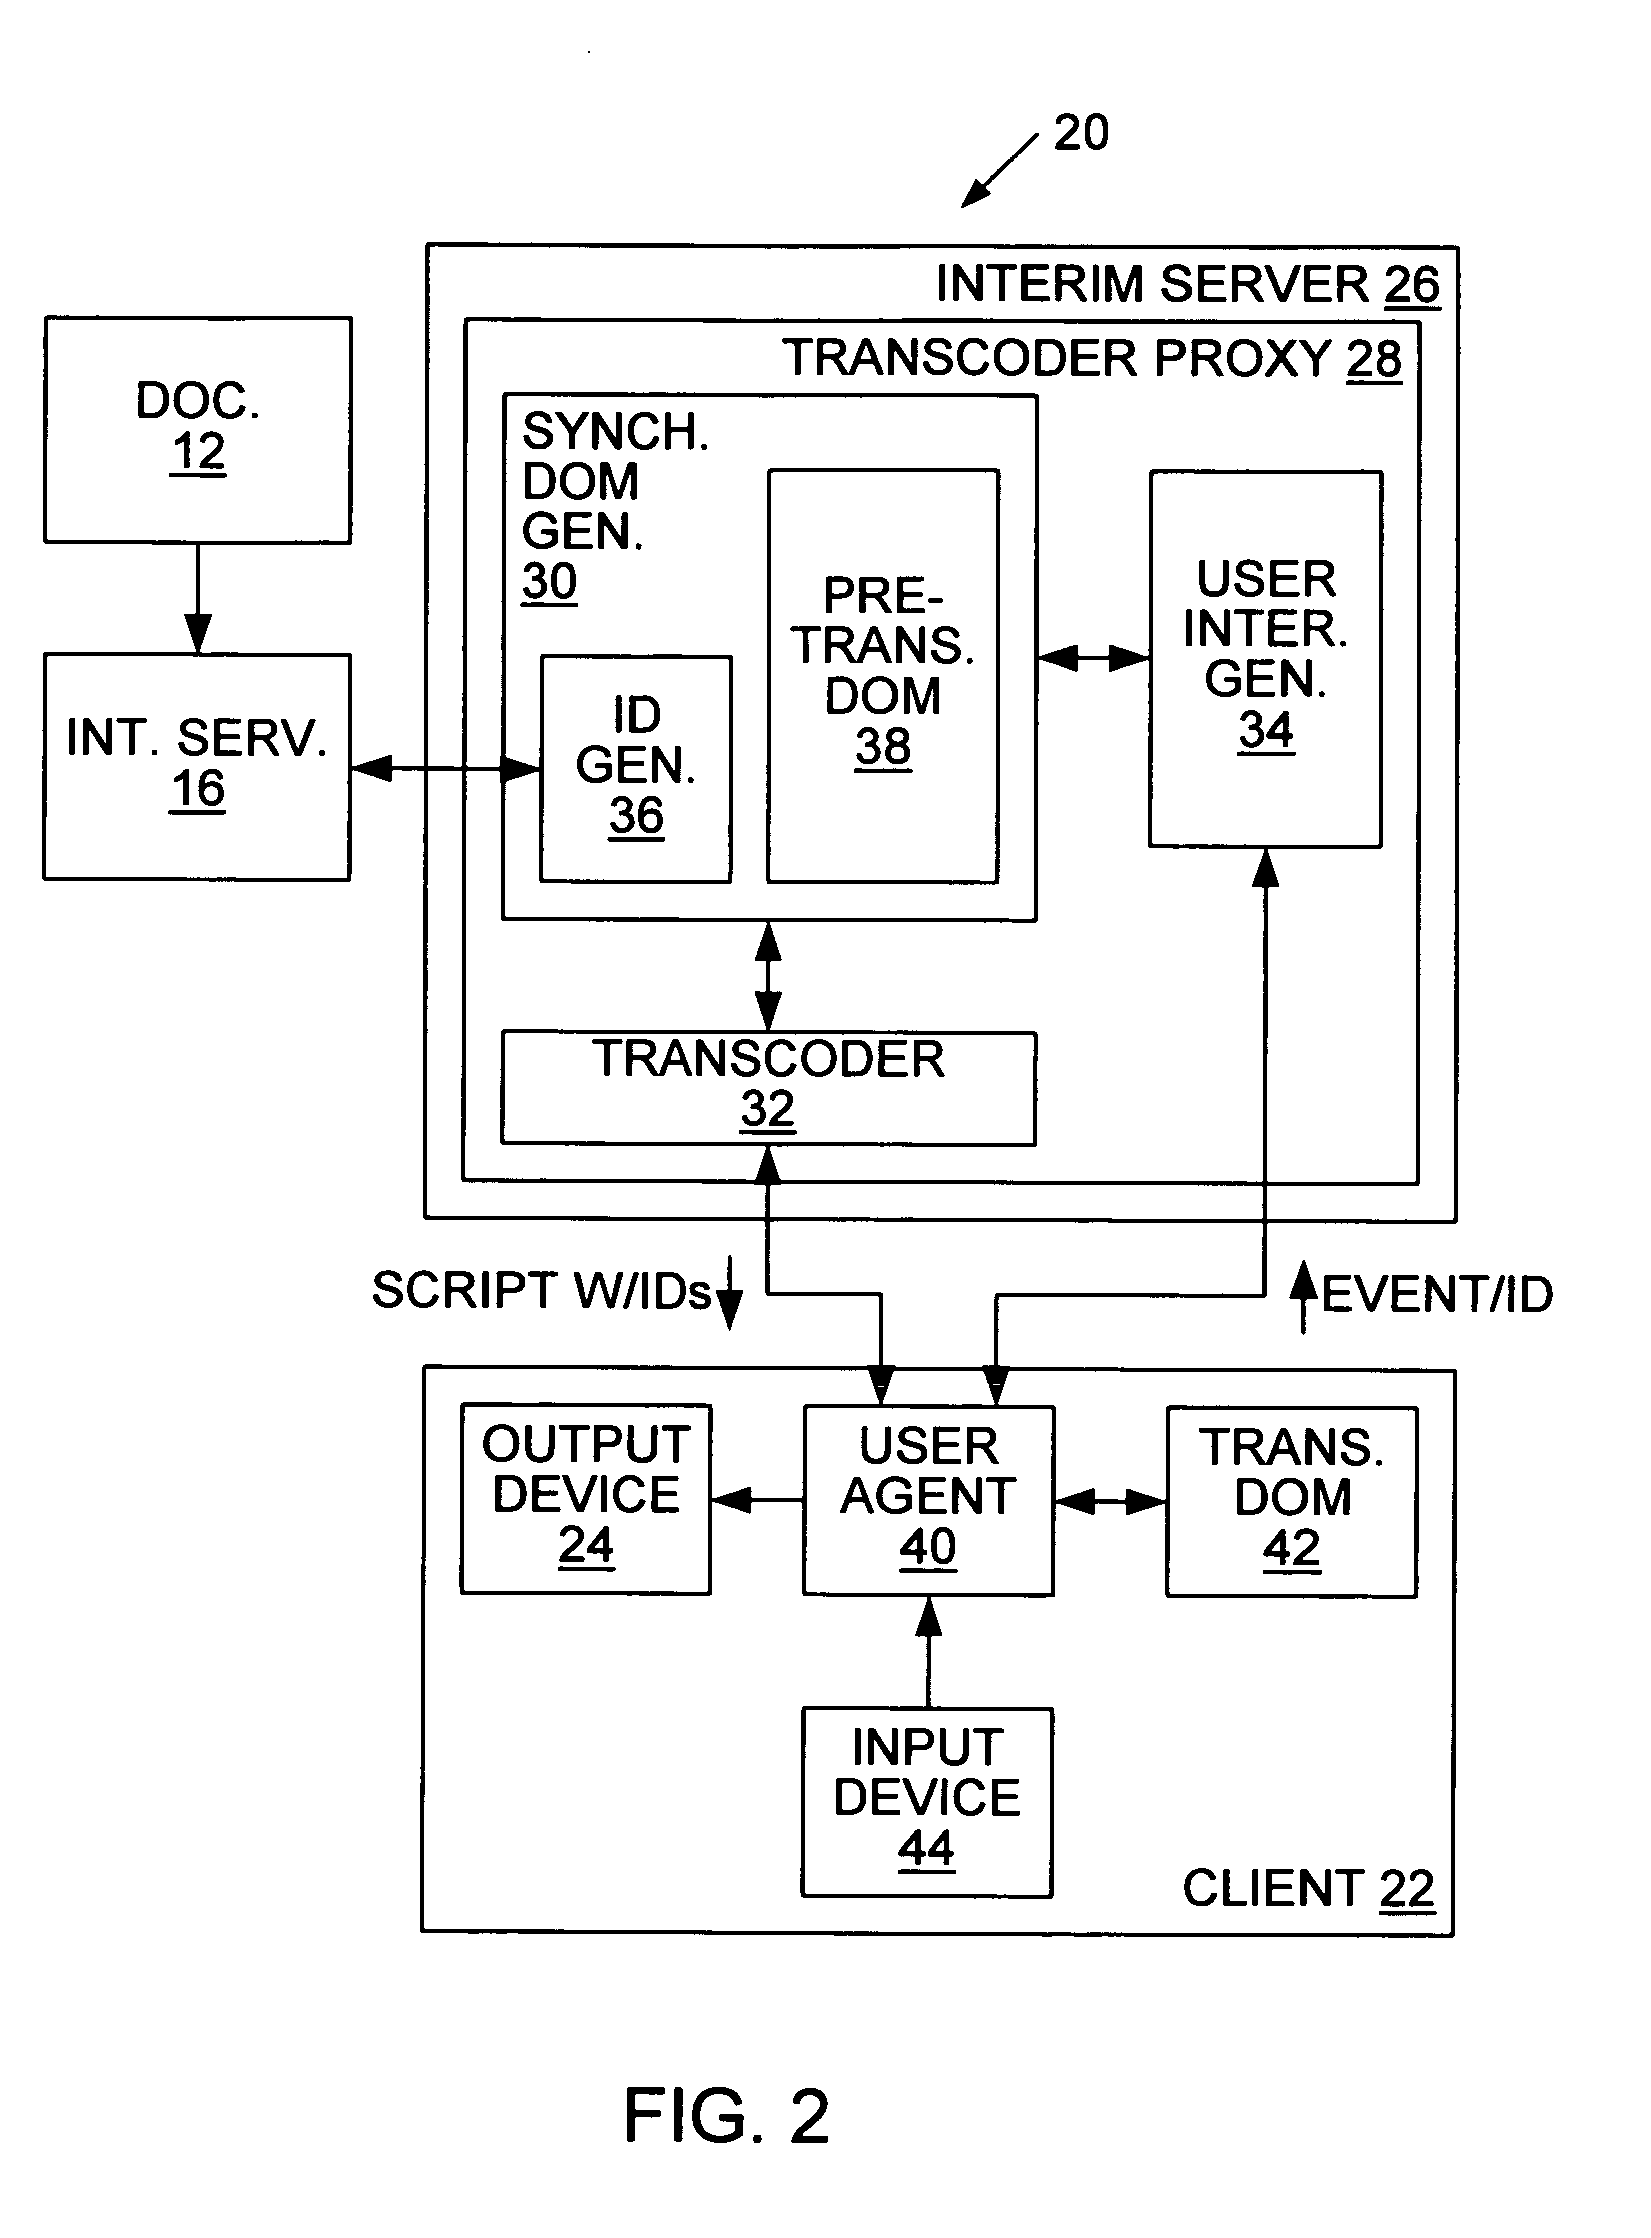 Electronic document delivery system employing distributed document object model (DOM) based transcoding and providing interactive javascript support